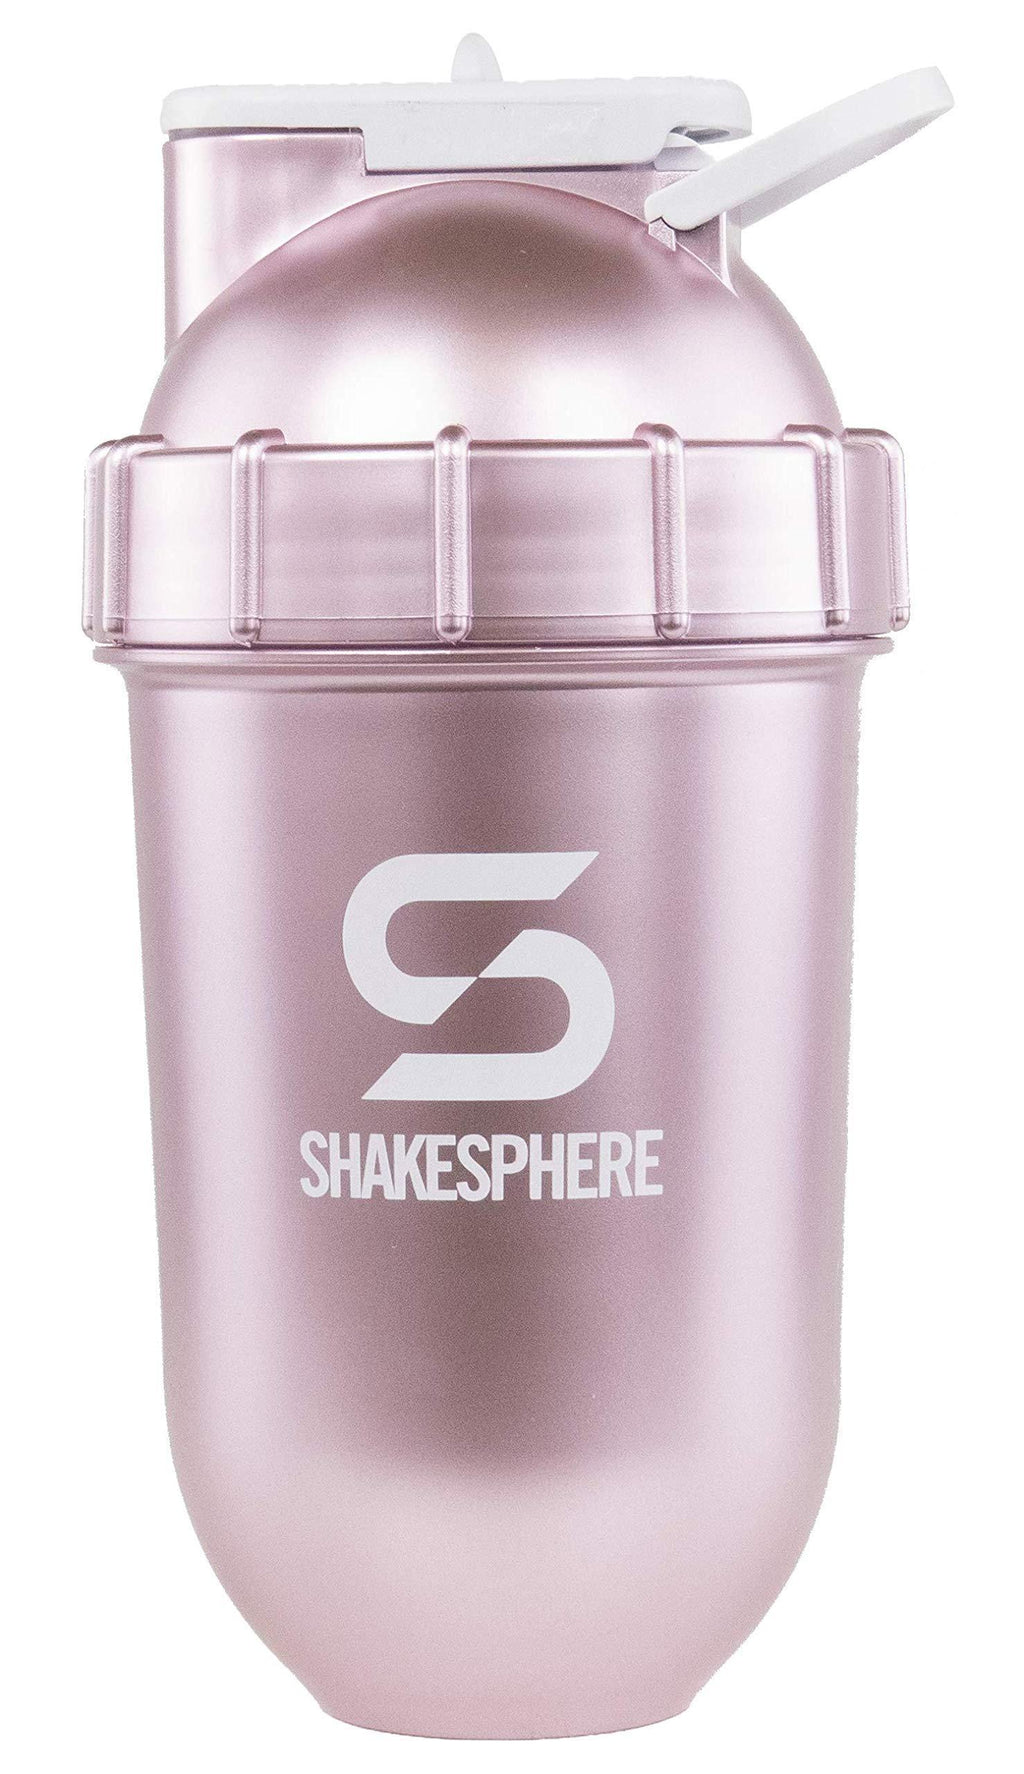  [AUSTRALIA] - ShakeSphere Tumbler: Award Winning Protein Shaker Cup, 24oz ● Patented Capsule Shape Mixing ● Easy to Clean ● No Blending Ball Needed ● BPA Free ● Mix & Drink Shakes, Protein Powders (Rose Gold) Rose Gold